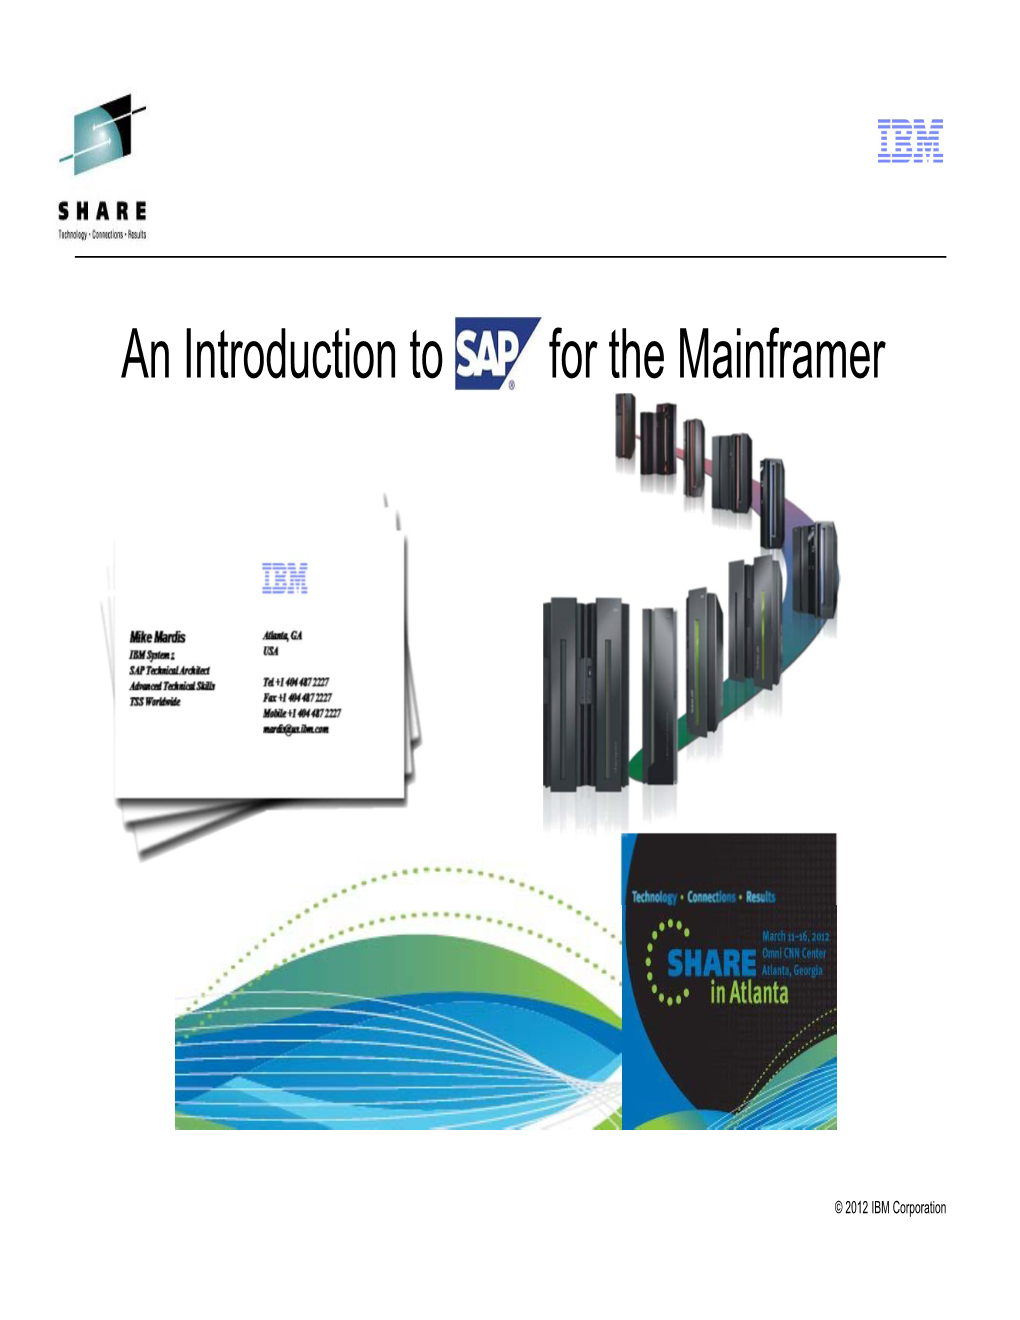 An Introduction to SAP for the Mainframer